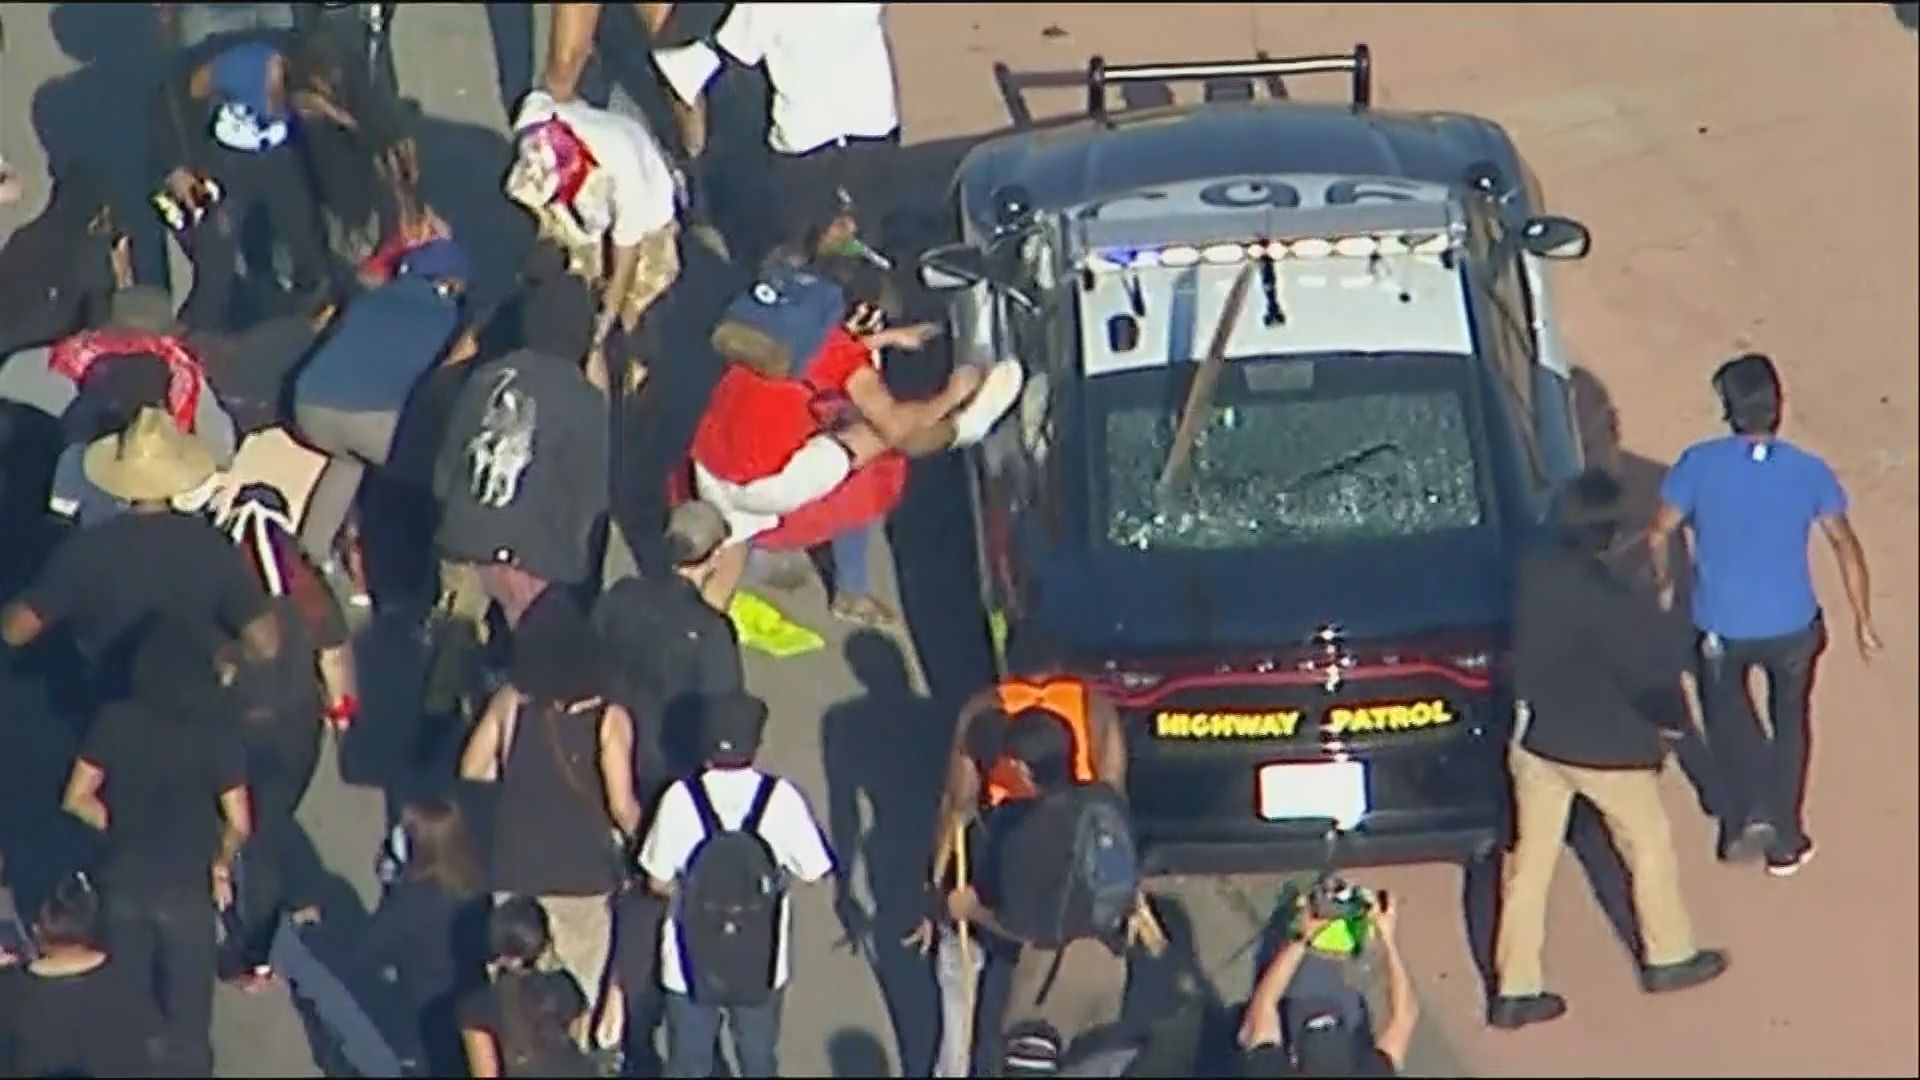 One protester was injured after reportedly jumped on the hood of a CHP cruiser and fell off when it sped away, according to an LA news station.